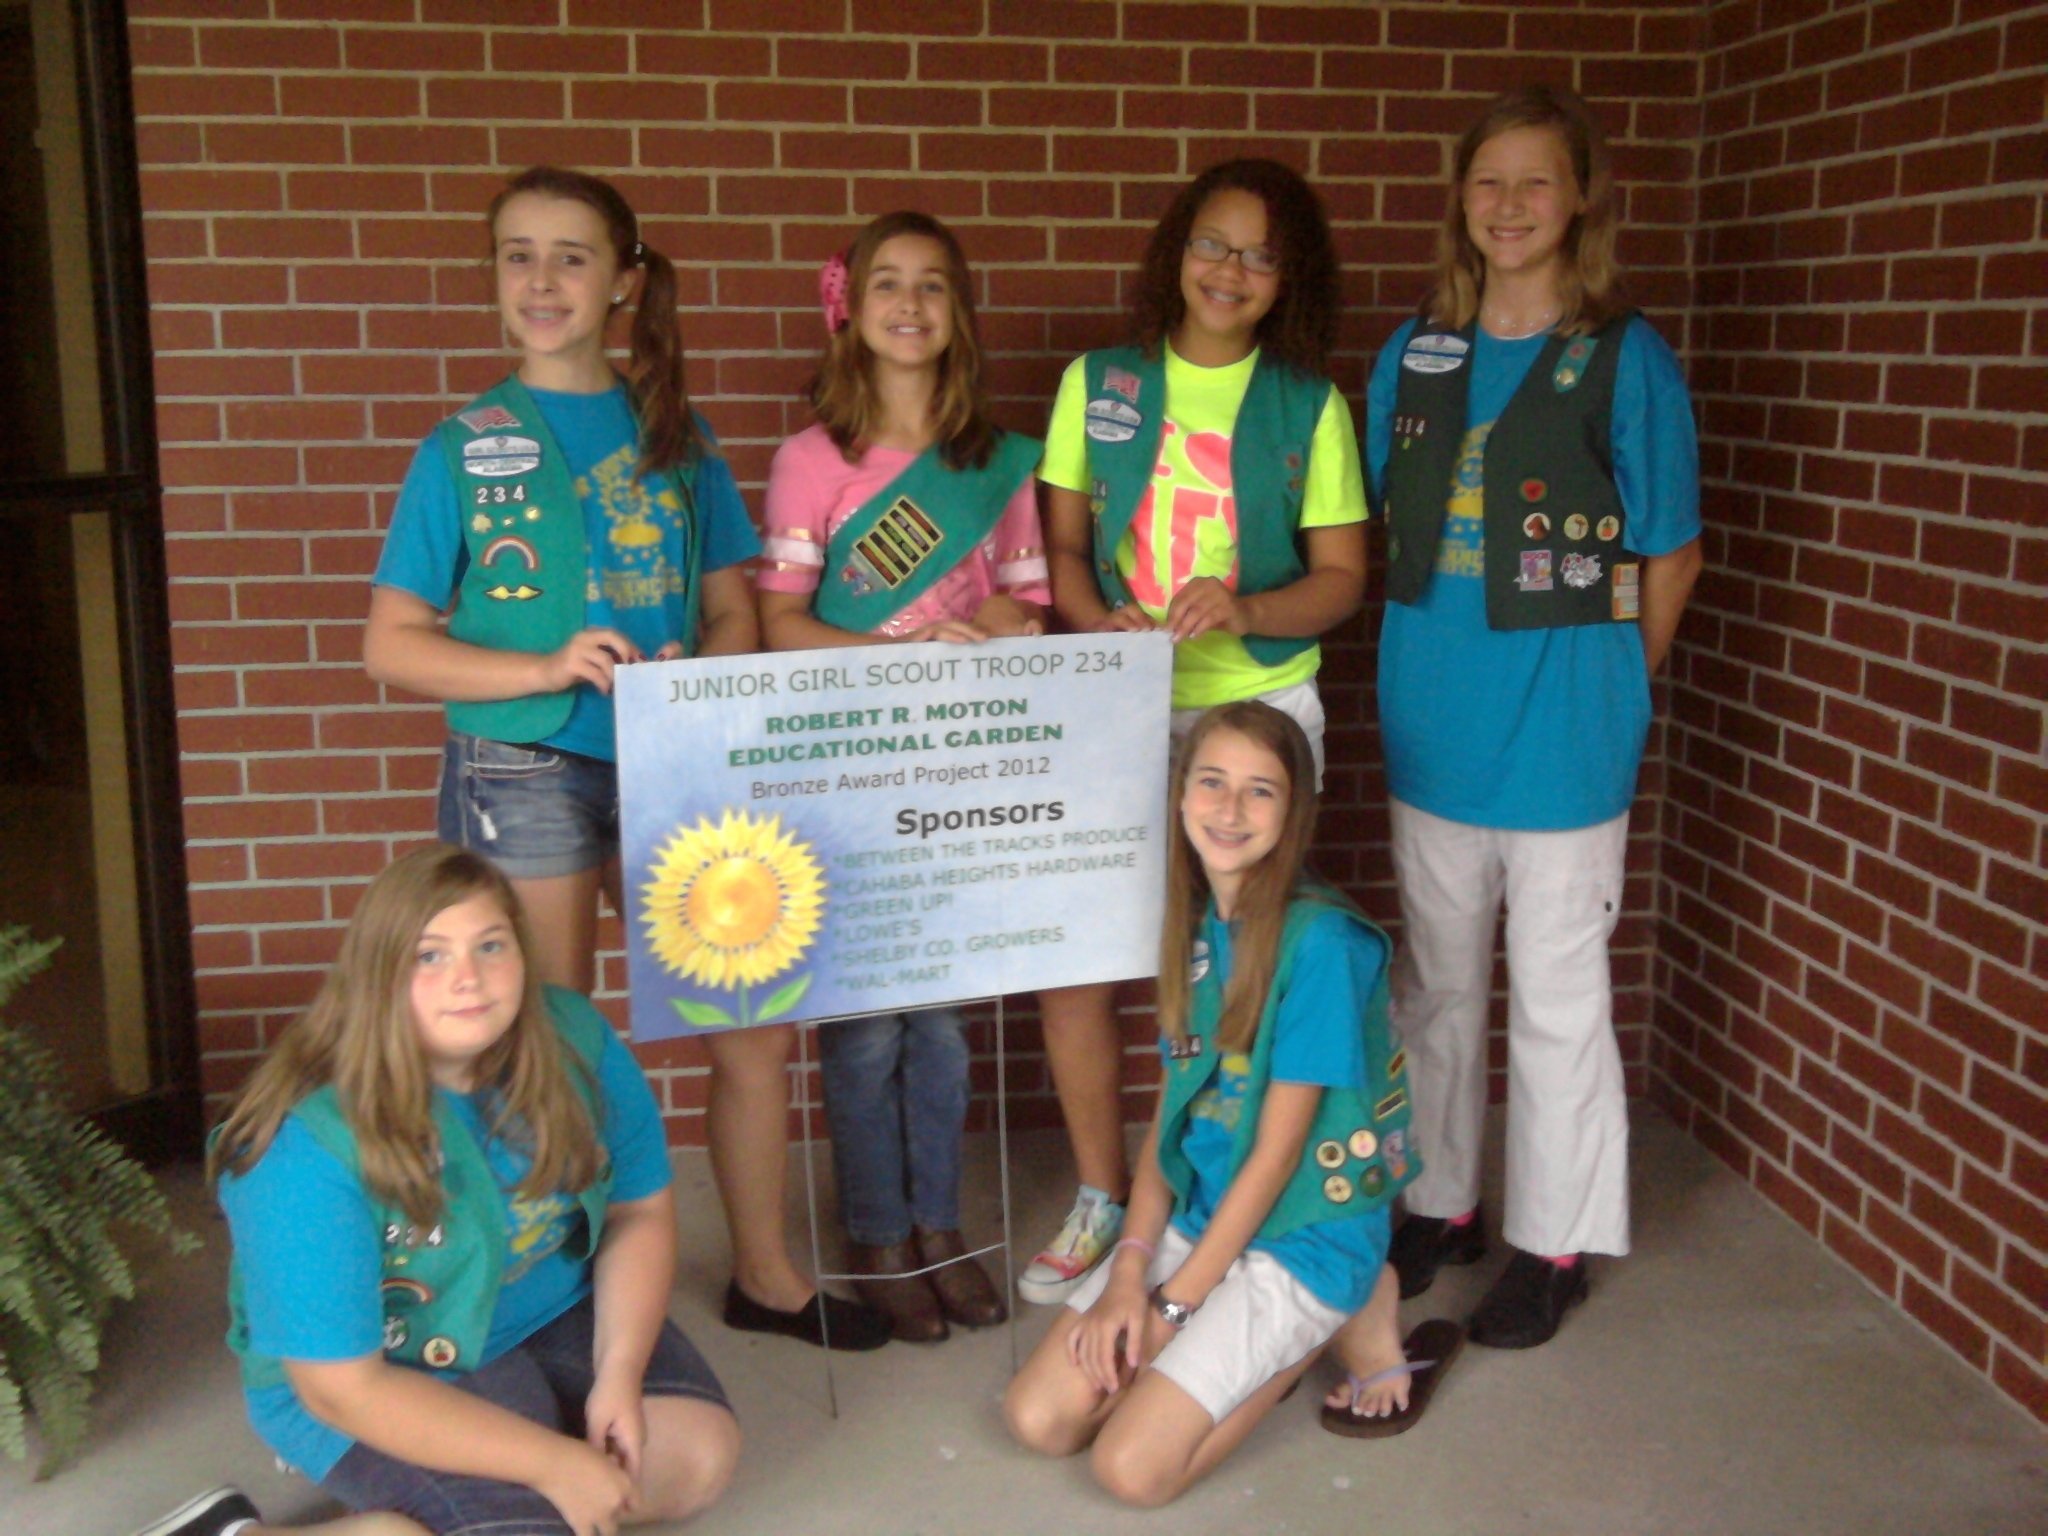 10 Fashionable Girl Scout Bronze Award Ideas girl scouts earn bronze award for educational garden planted at 2022